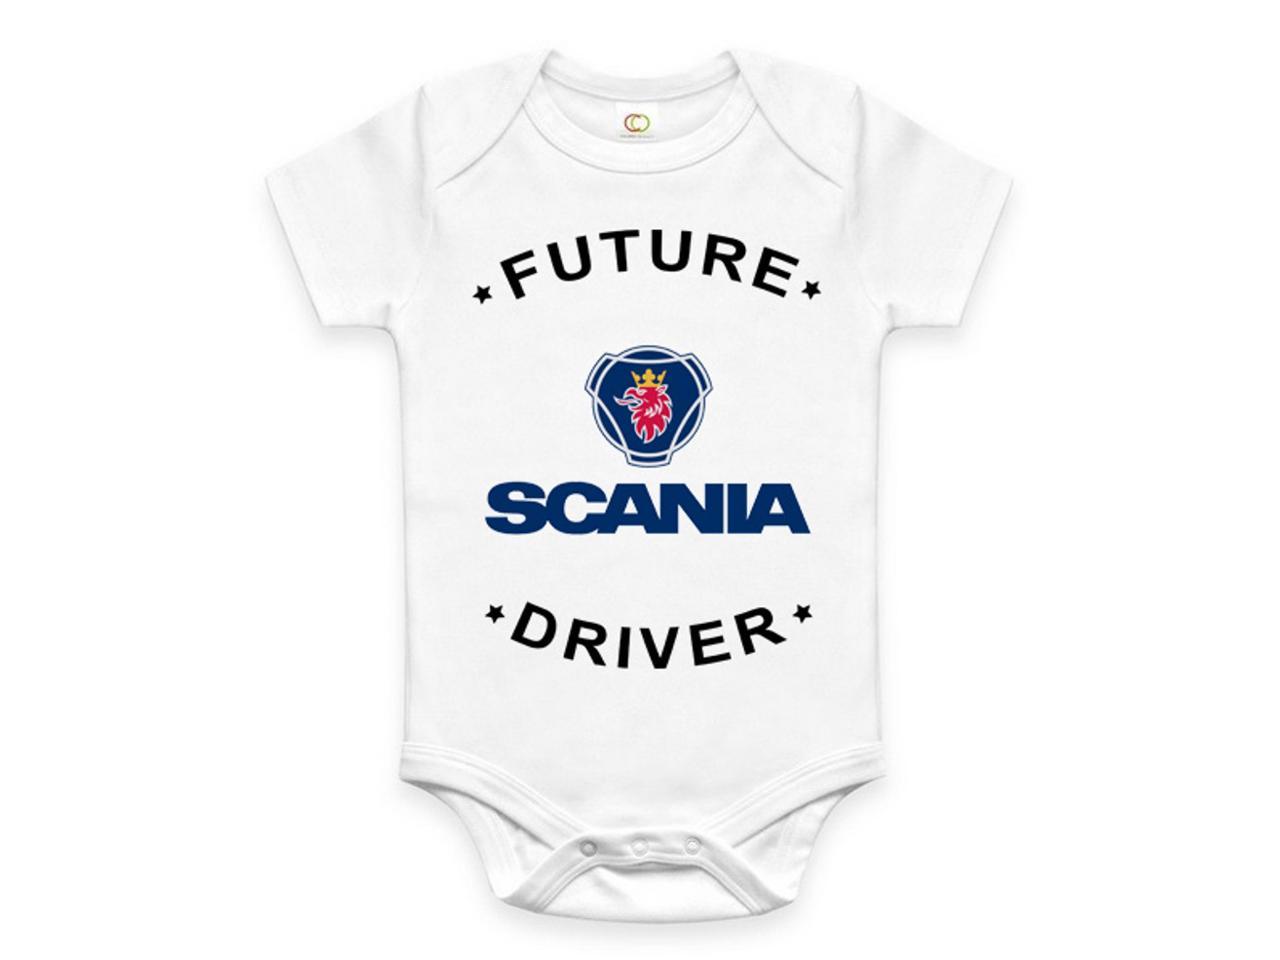 Rare New Future Scania Truck Driver Funny Baby Clothes Cute Unisex Bodysuit Onesie Short Sleeve Romper One Piece Prime Outfits with Sayings Pagliaccetto